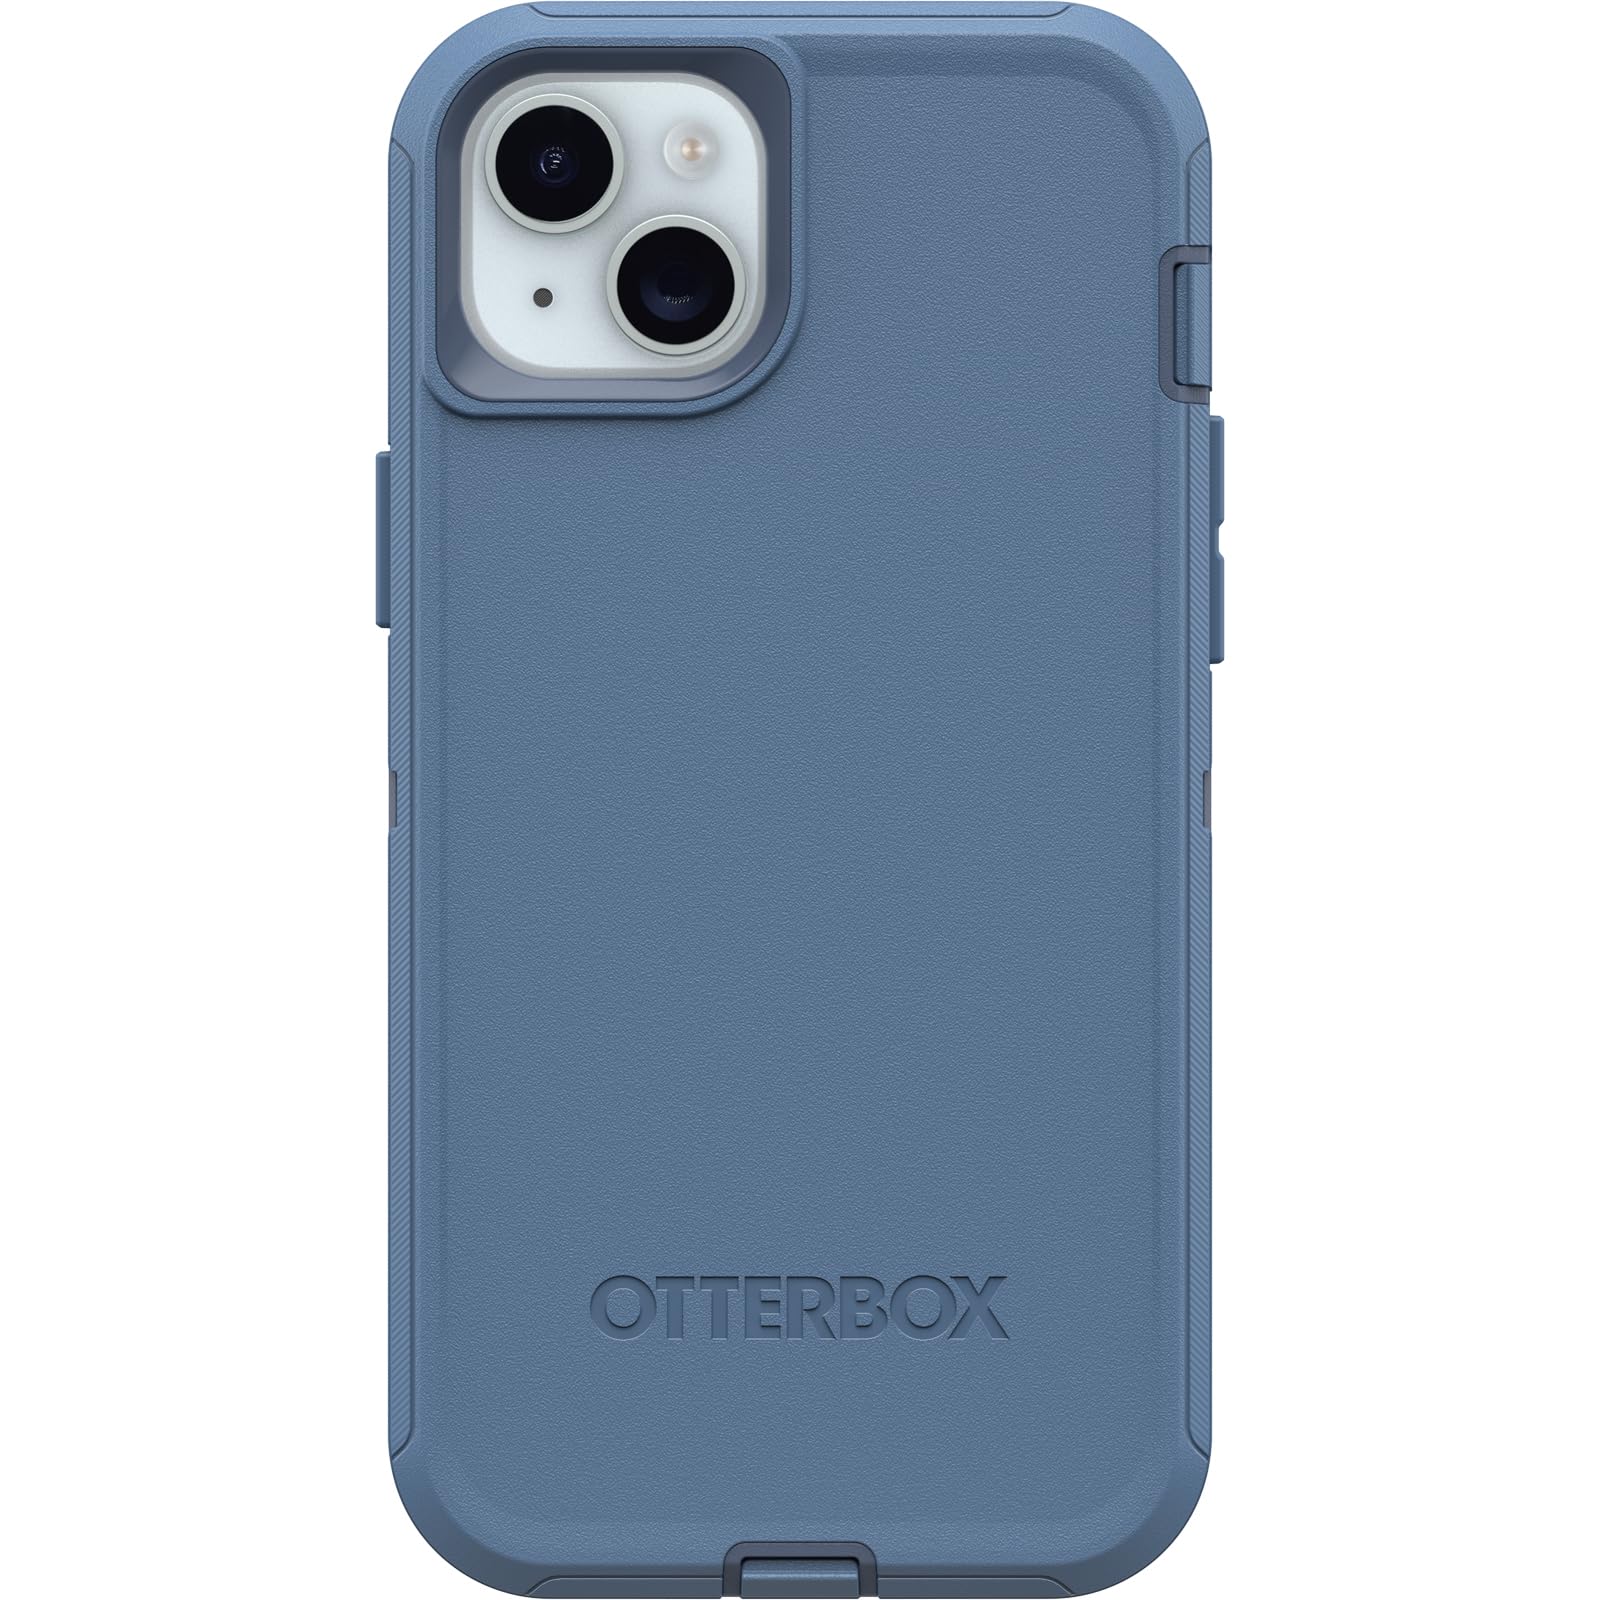 OtterBox iPhone 15 Plus and iPhone 14 Plus Defender Series Case - BABY BLUE JEANS (Blue), screenless, rugged & durable, with port protection, includes holster clip kickstand